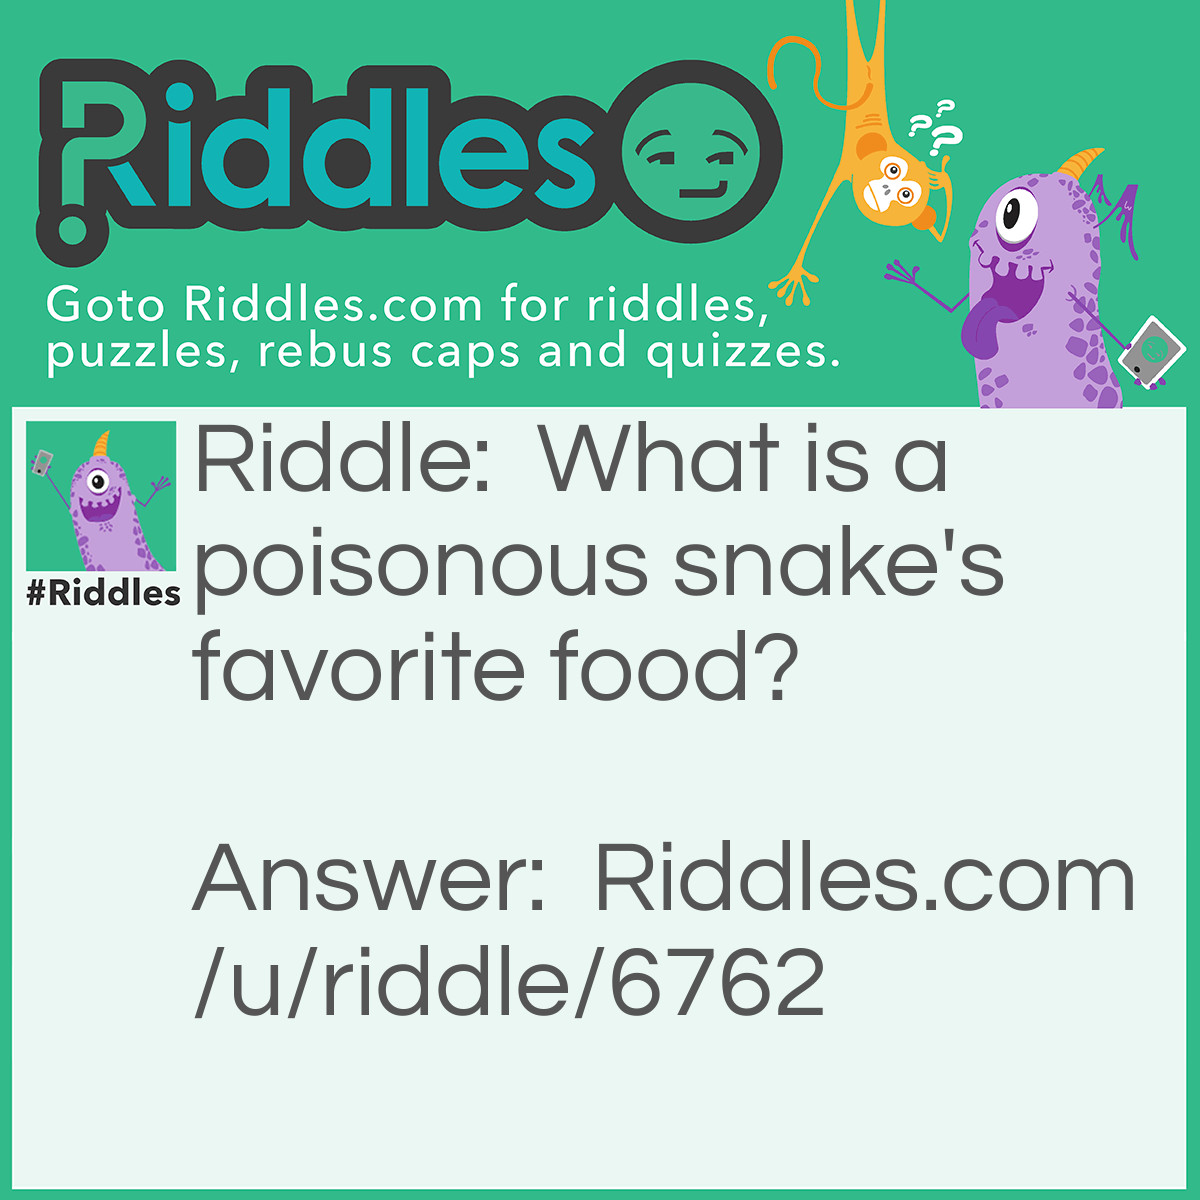 Riddle: What is a poisonous snake's favorite food? Answer: A peanut butter deadly sandwich!